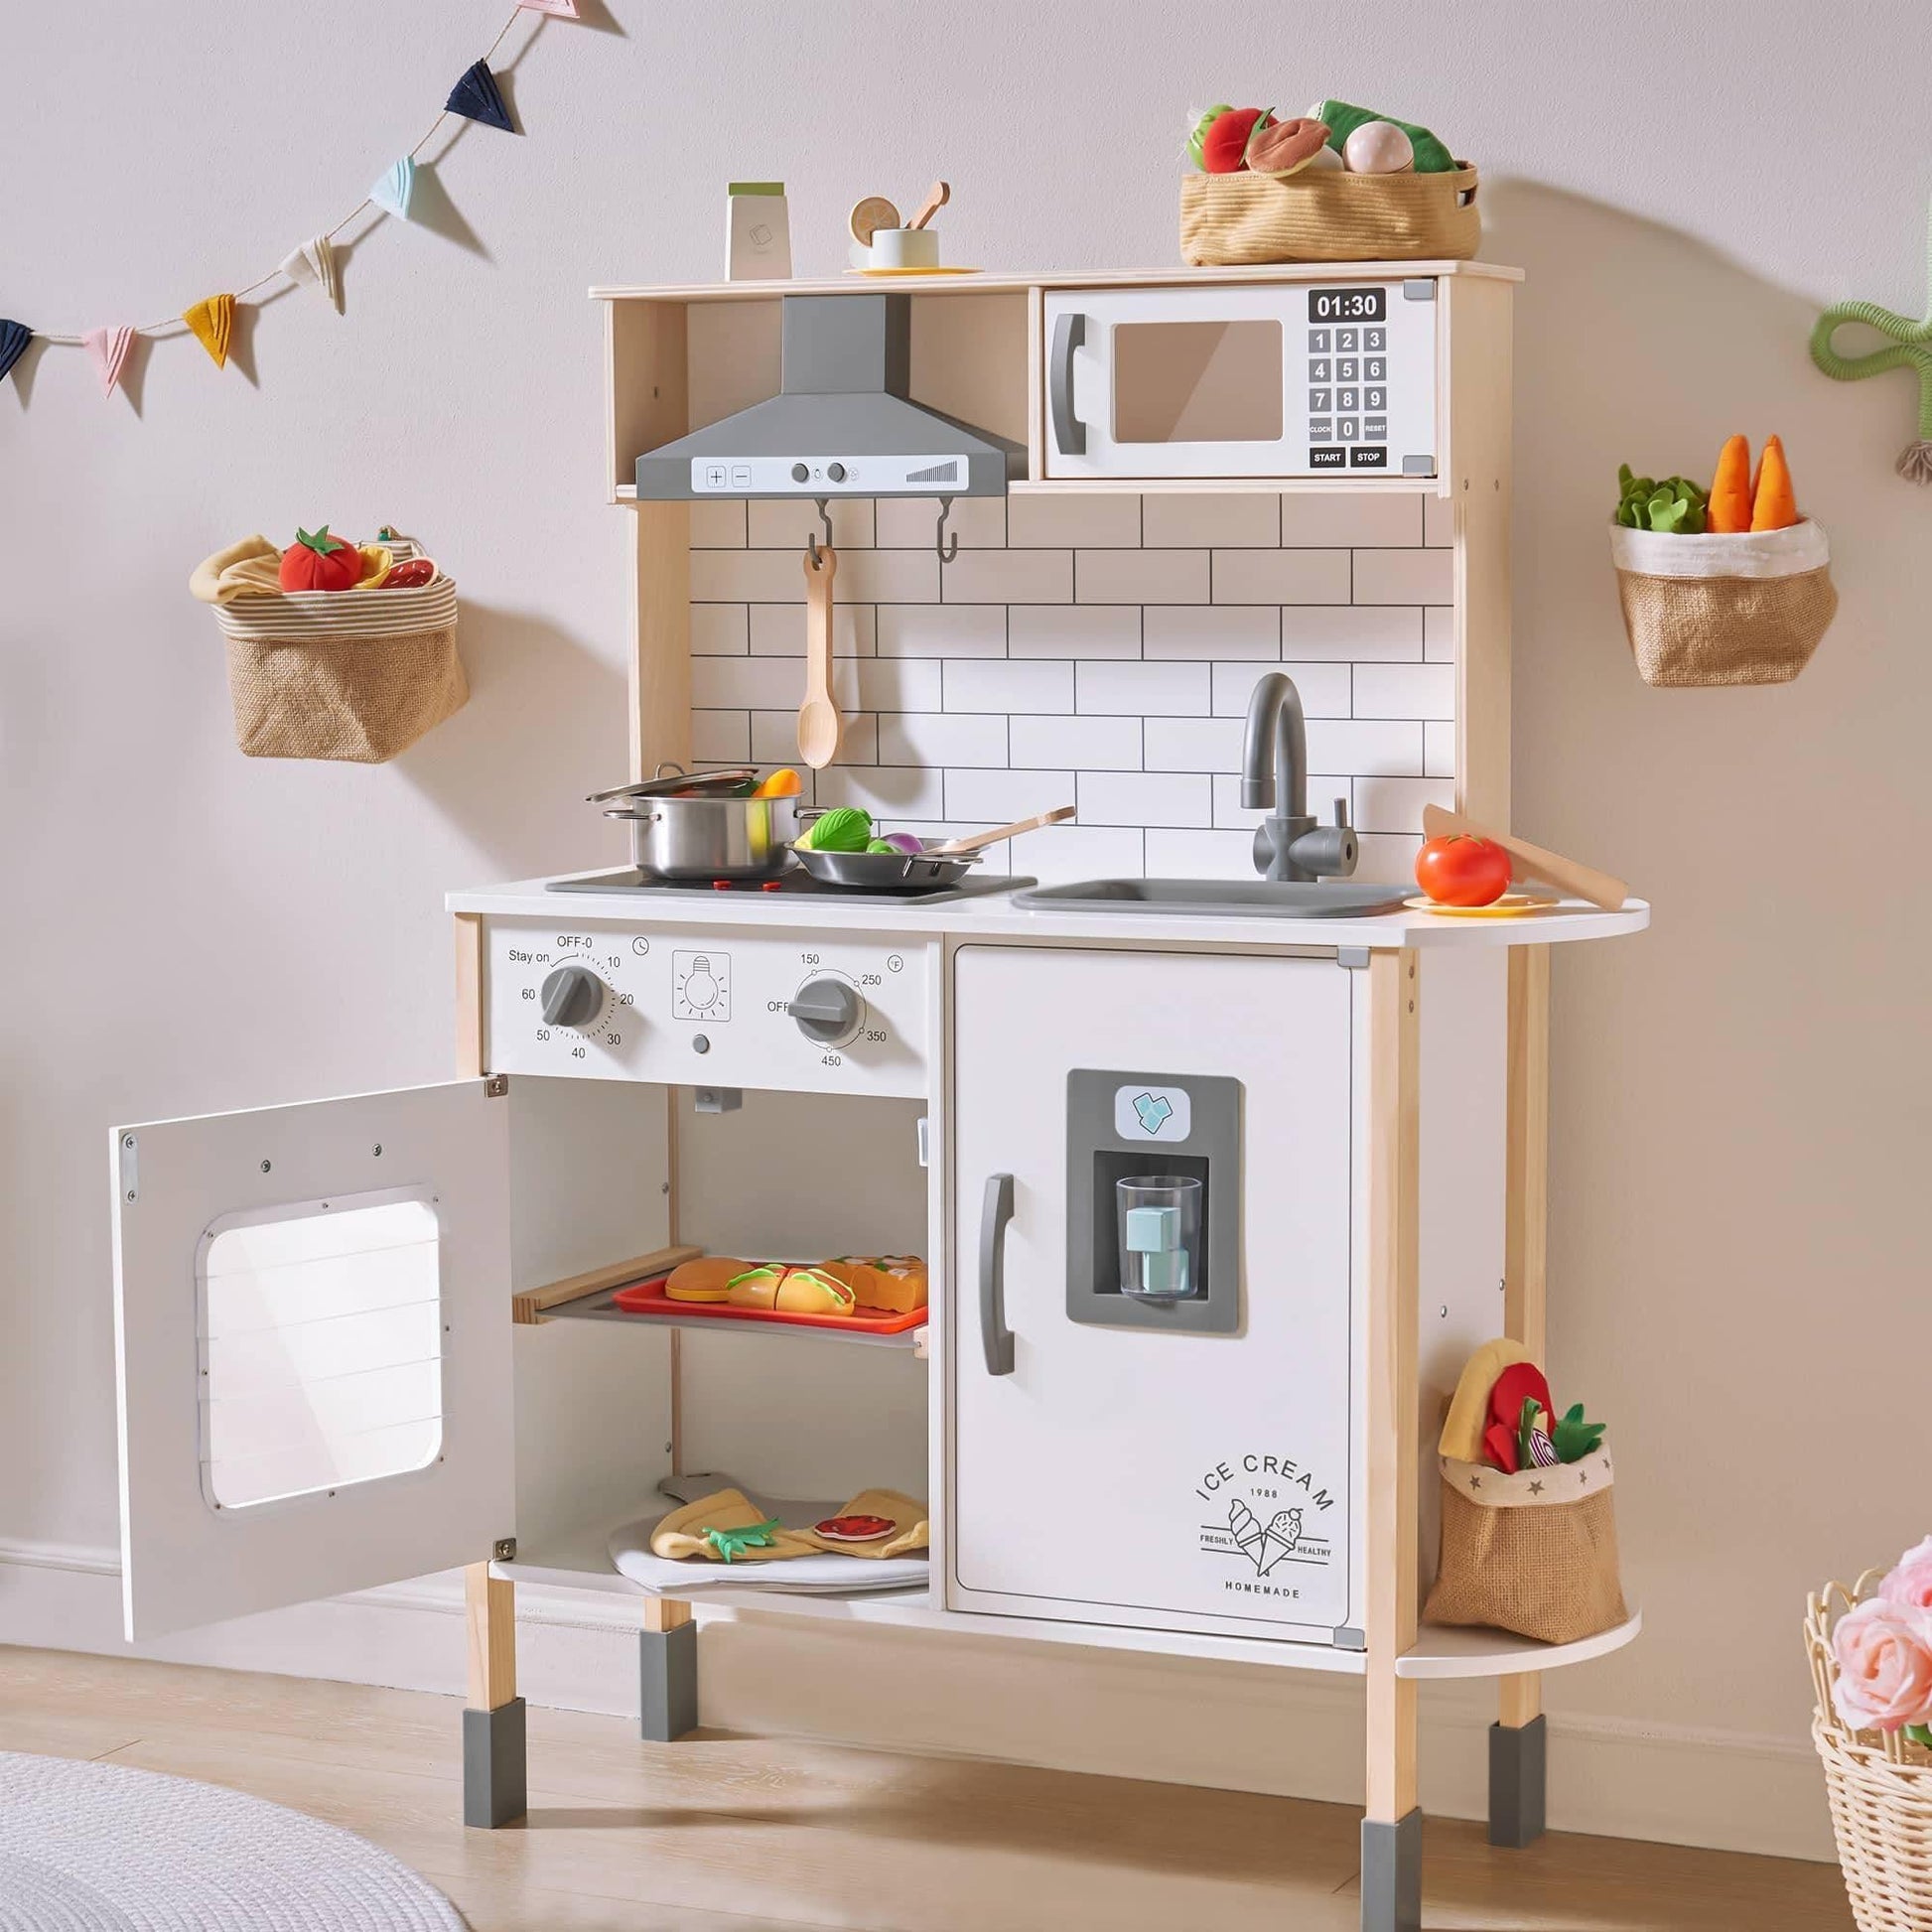 https://www.tinylandus.com/cdn/shop/files/tiny-land-r-play-kitchen-with-18-pcs-toy-food-and-cookware-accessories-tiny-land-4_1739dc42-1cba-4355-99c5-b08bd490822f.jpg?v=1690784443&width=1946